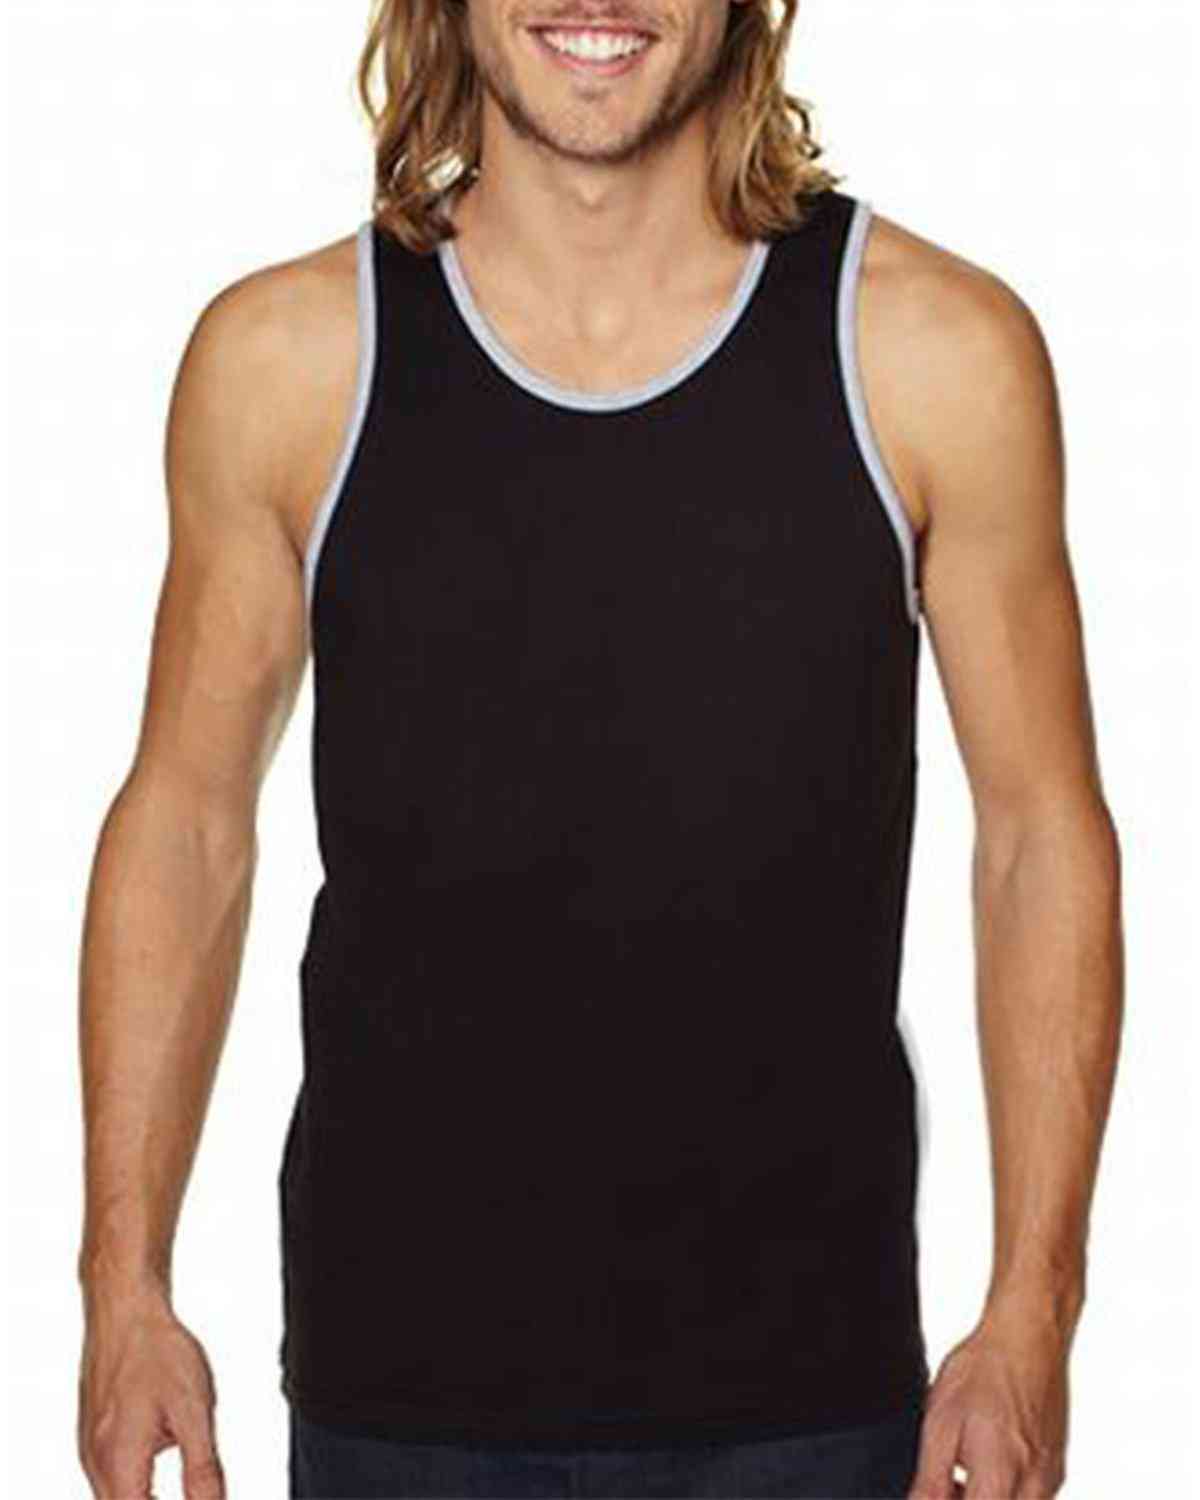 High-Quality Customized Tank Tops - Fast Shipping - Custom One Express